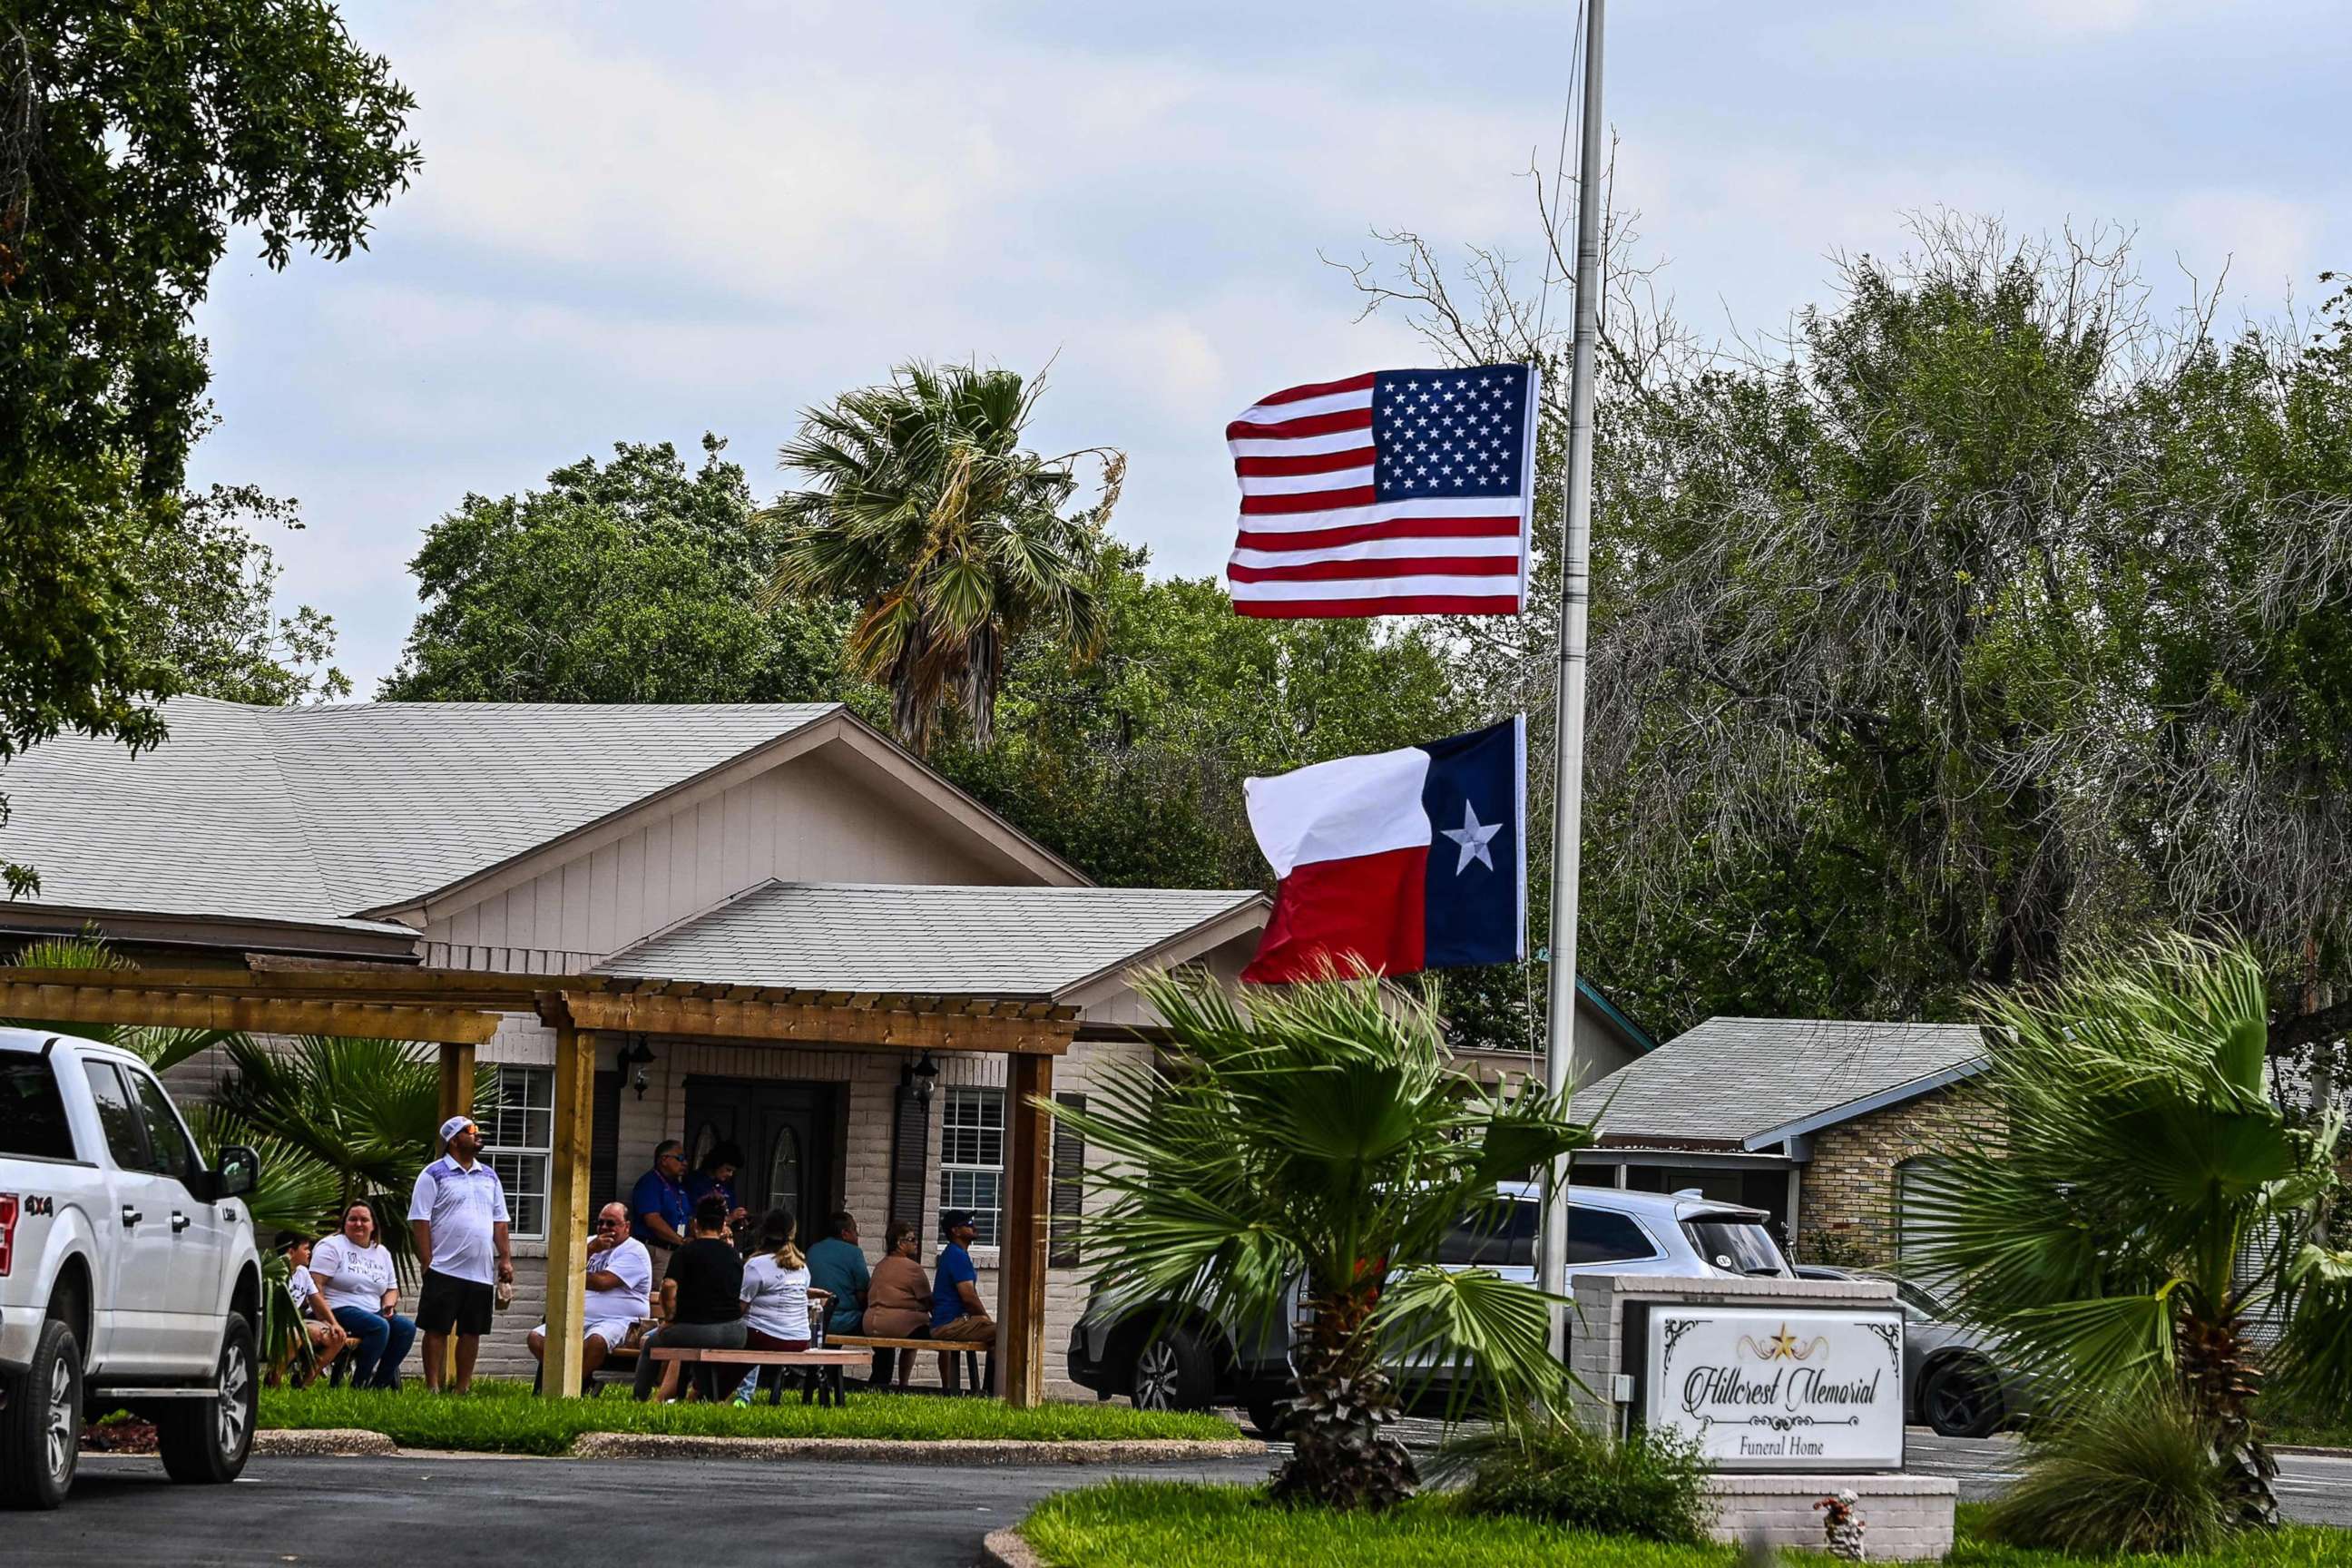 PHOTO: People visit Hillcrest Memorial Funeral Home in Uvalde, Texas, on May 30, 2022, during the visitation for Amerie Jo Garza, who died in the mass shooting at Robb Elementary School.